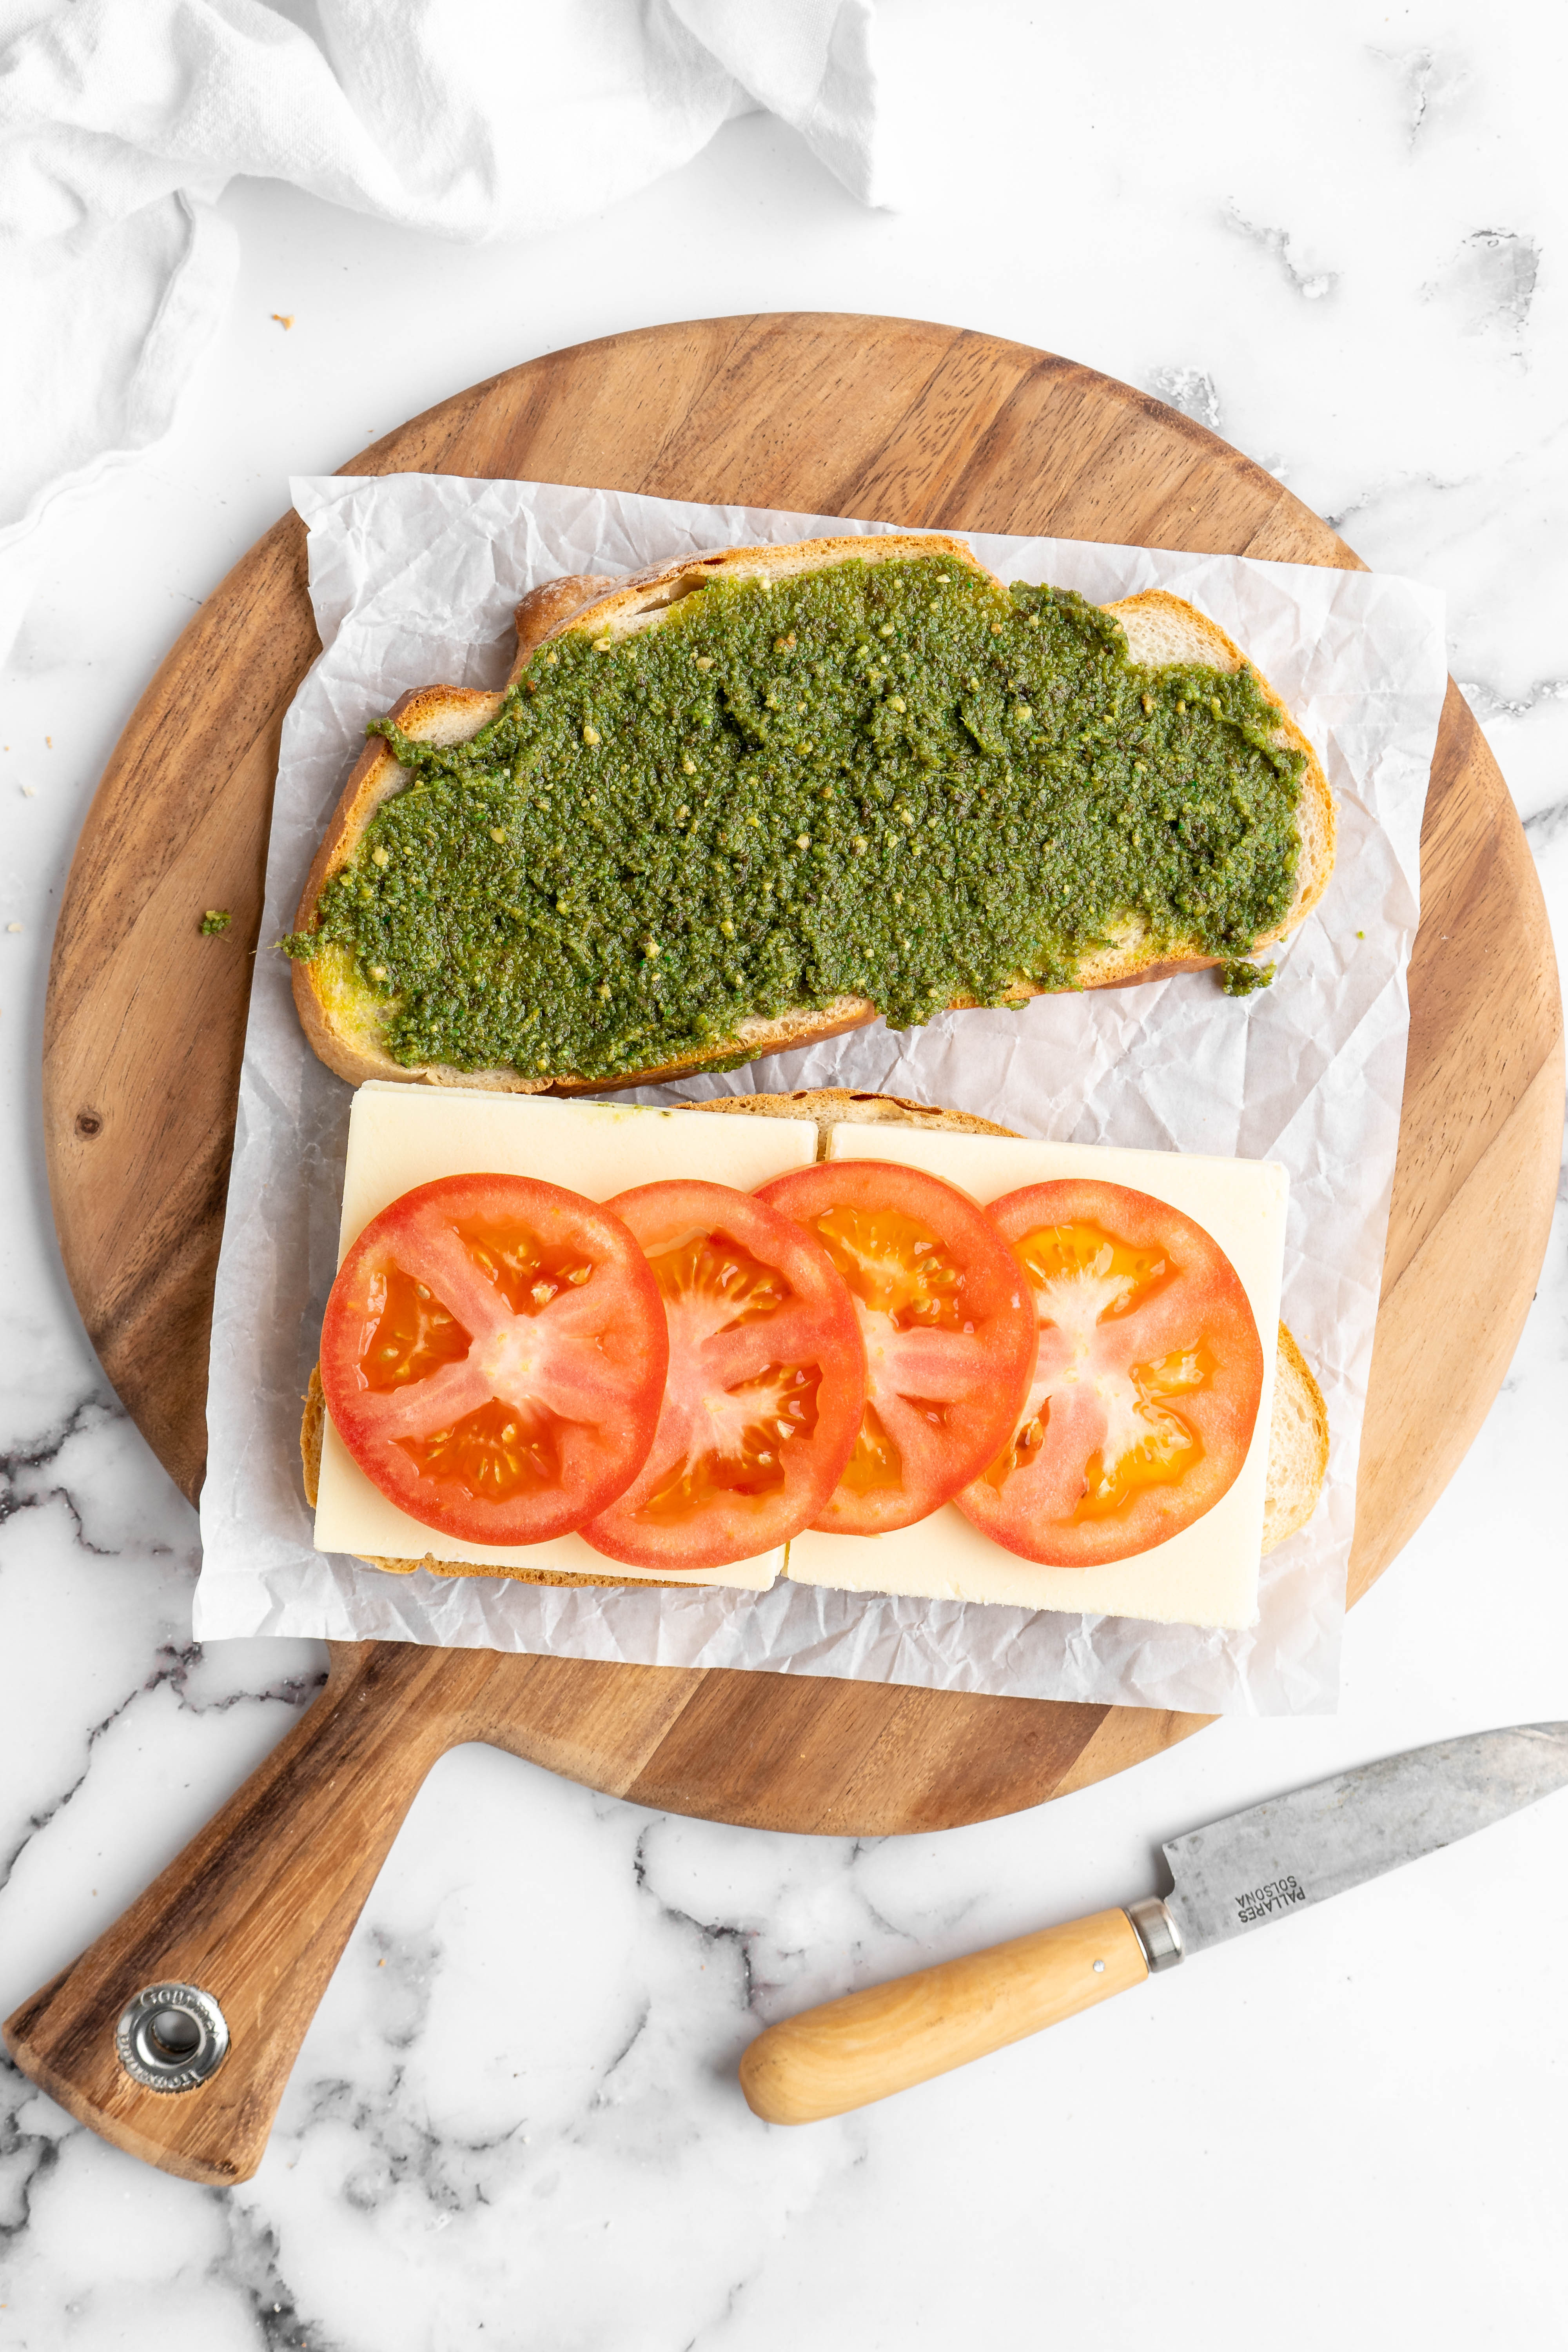 One slice of bread spread with pesto, another topped with mozzarella and tomatoes on round cutting board